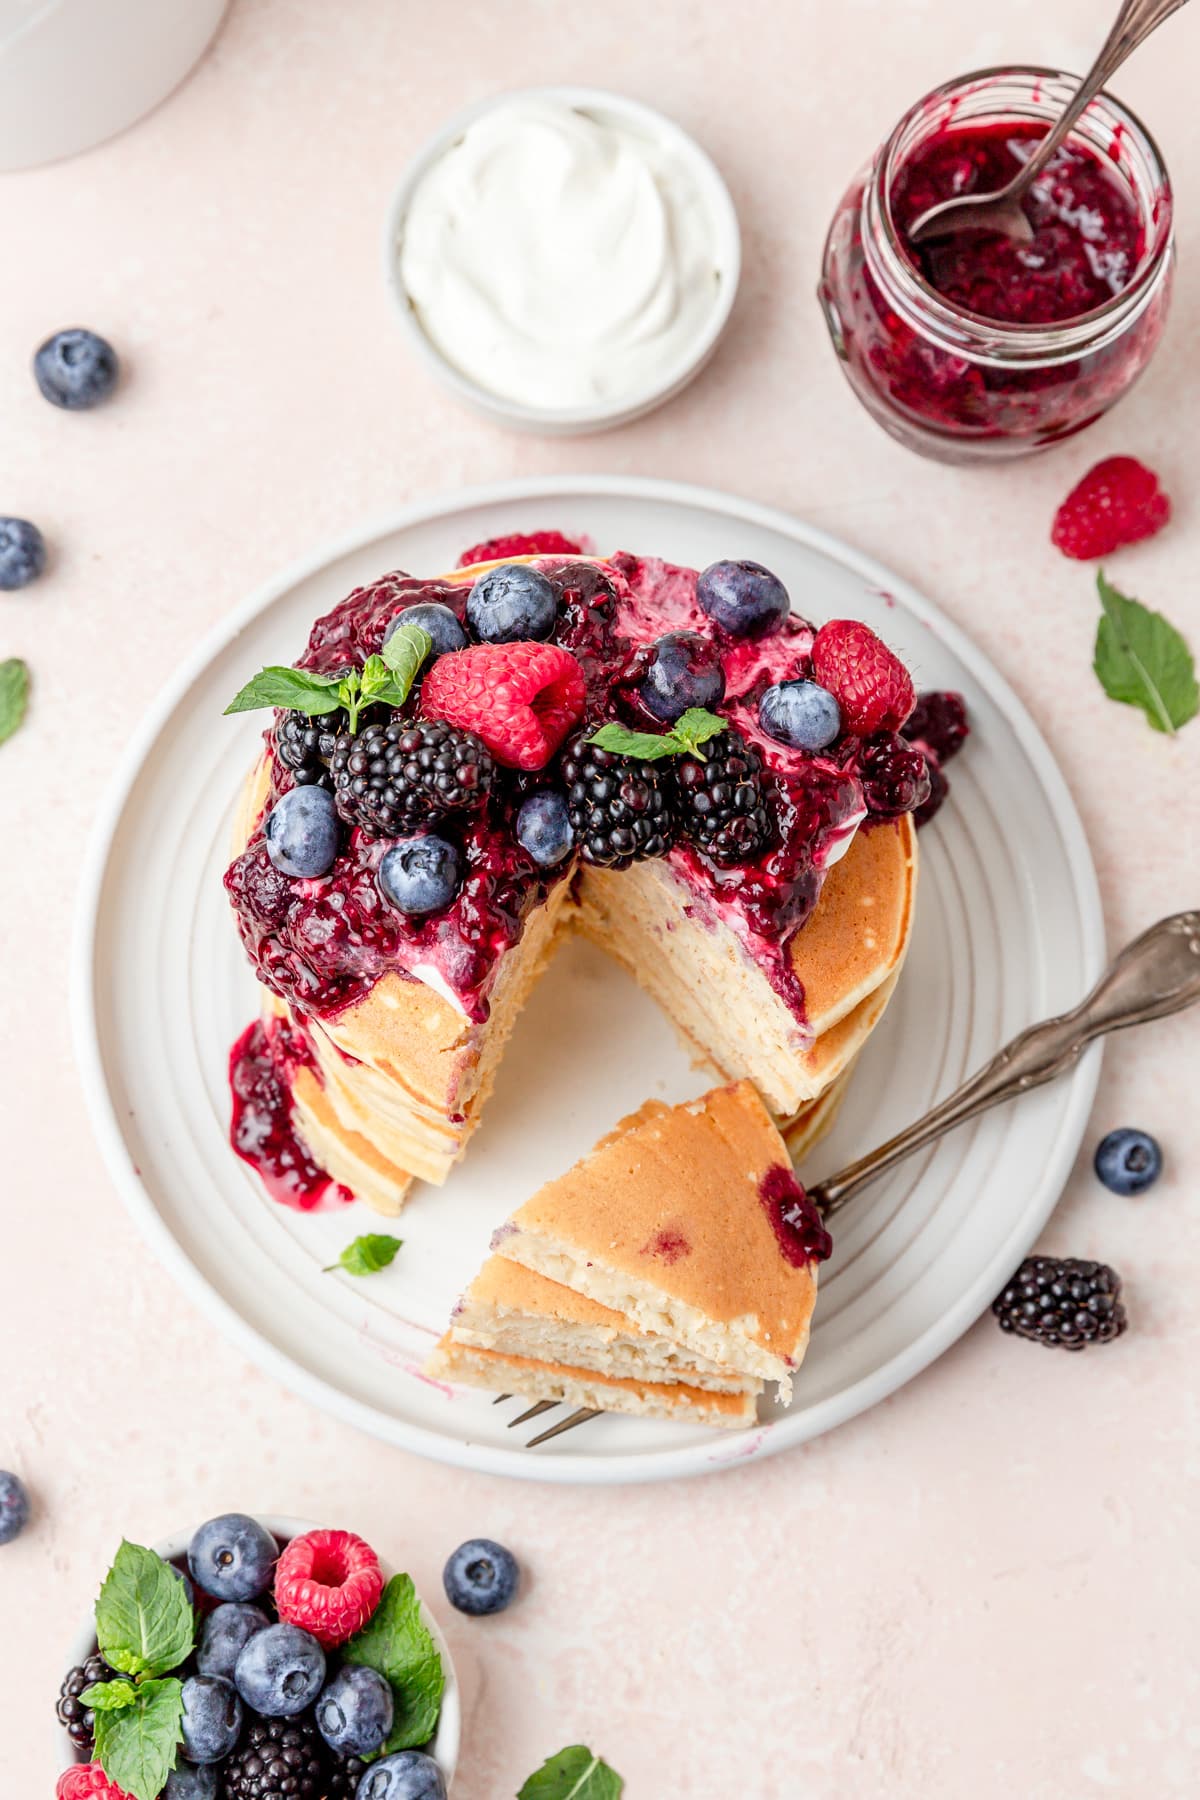 ricotta pancakes topped with whipped cream, berry sauce, and fresh berries.